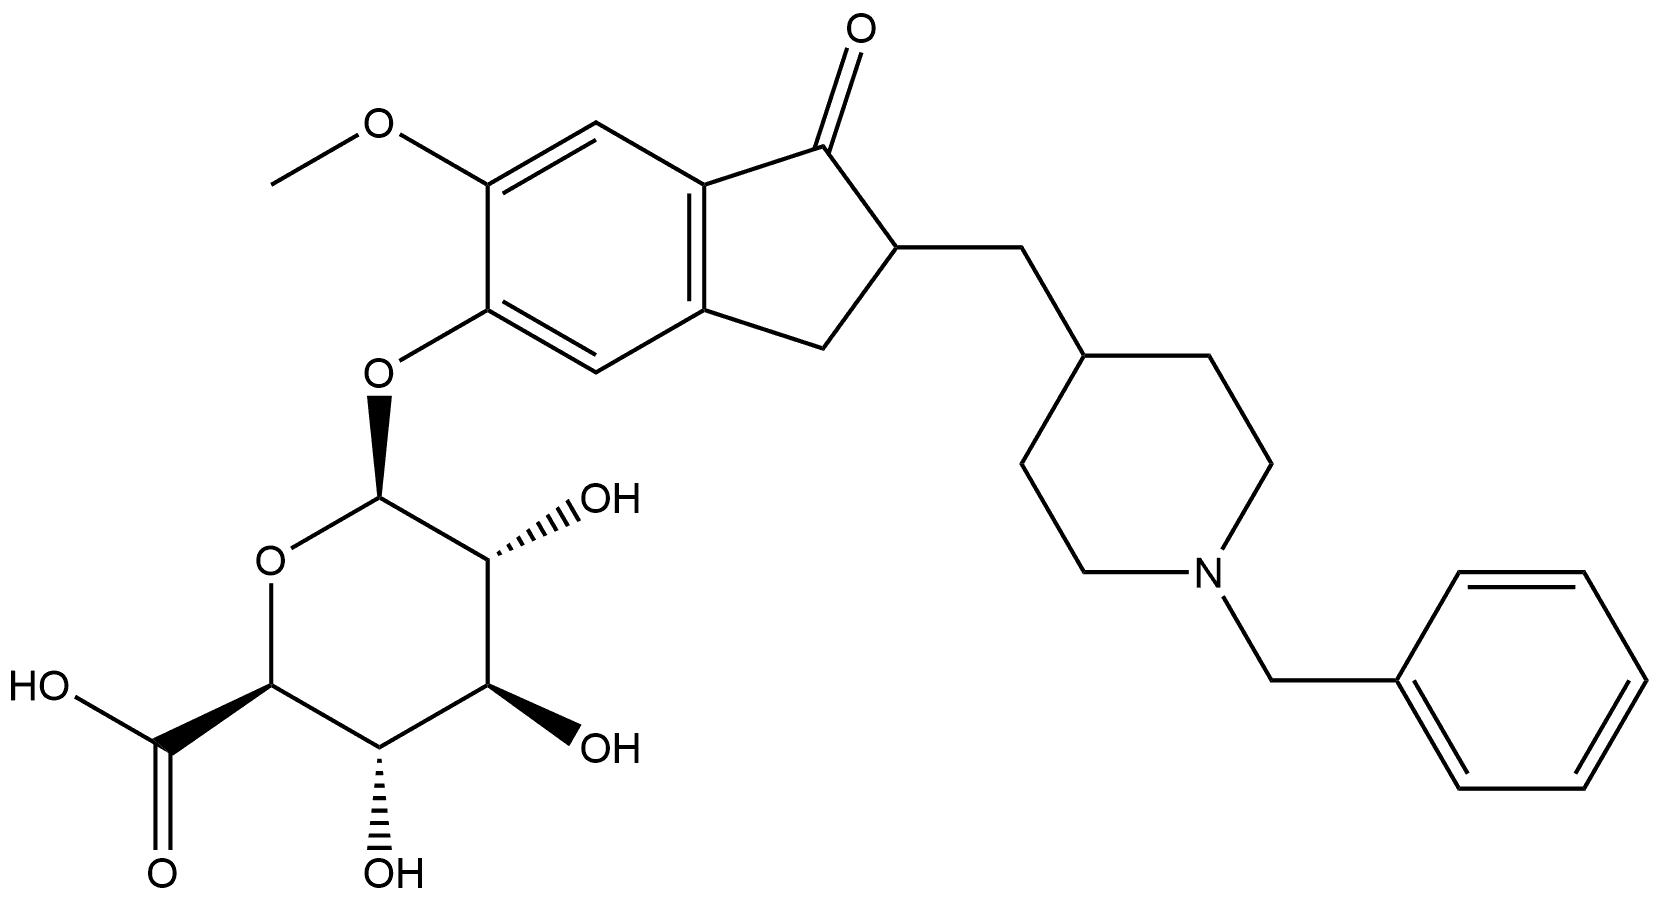 5-O-Desmethyl Donepezil Glucuronide (Mixture of Diastereomers) Structure